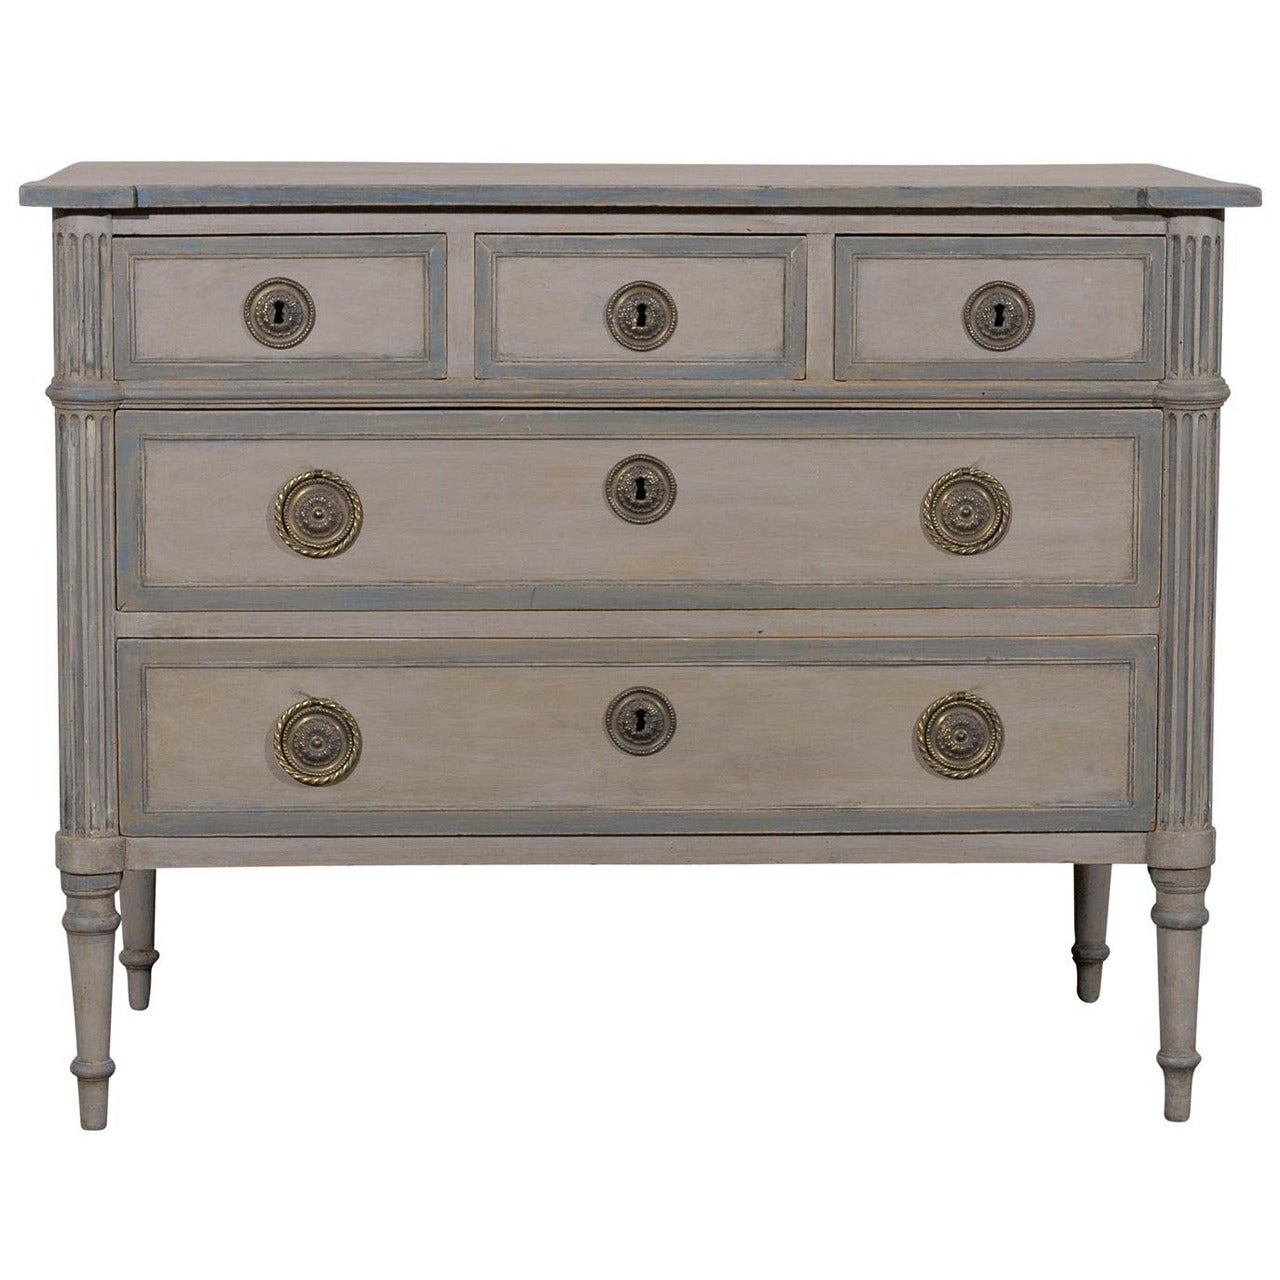 19th Century French Five-Drawer Painted Wood Chest